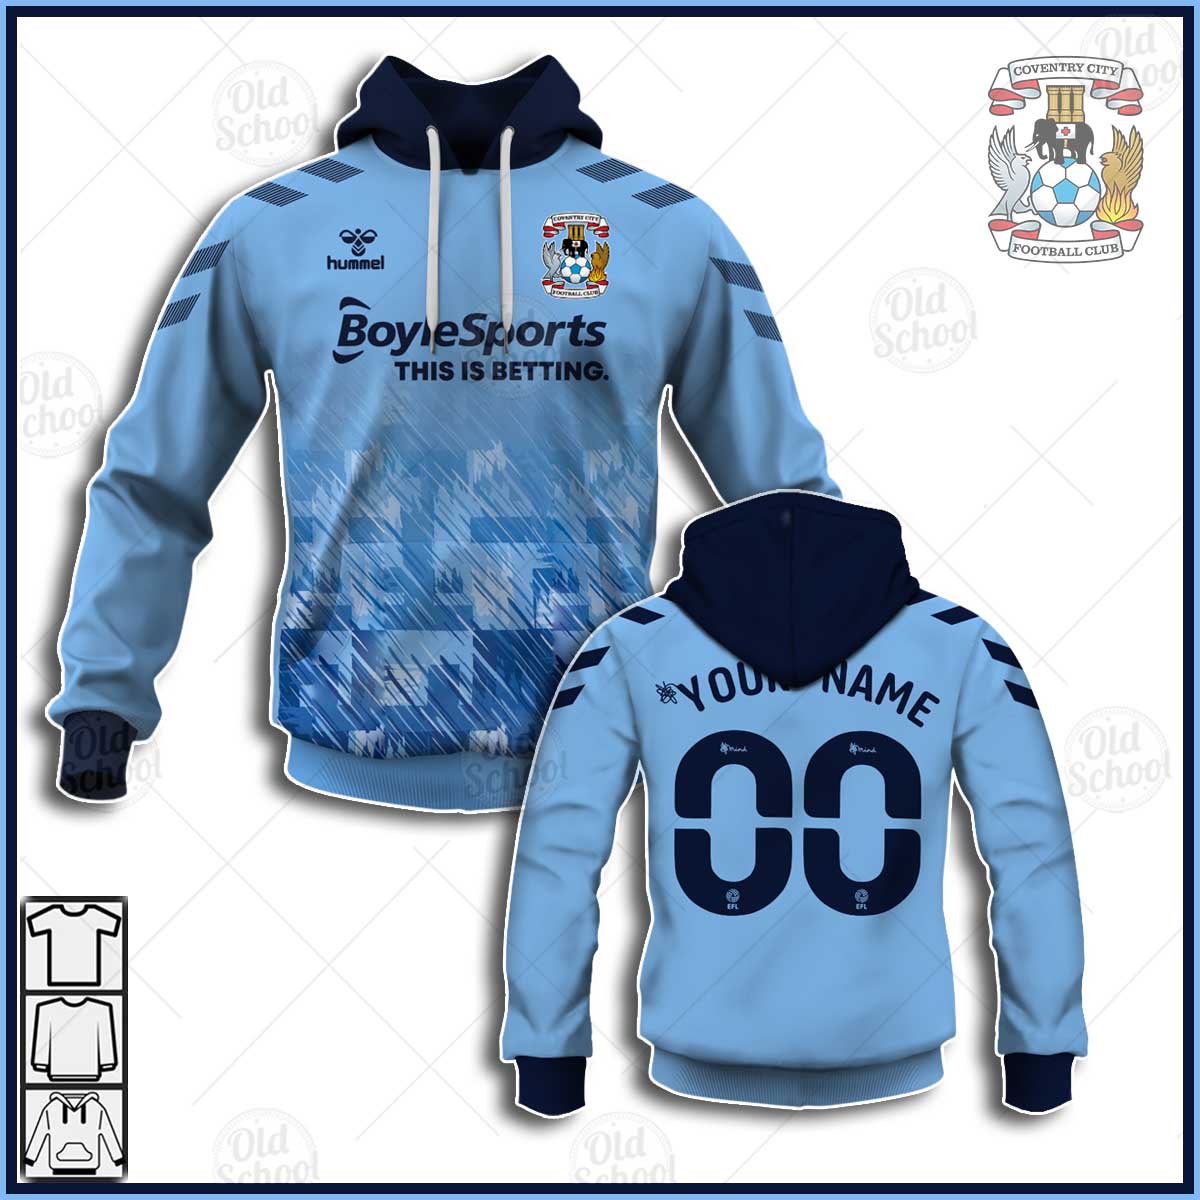 Personalise EFL Championship Coventry City F.C. 2020/21 Home Jersey